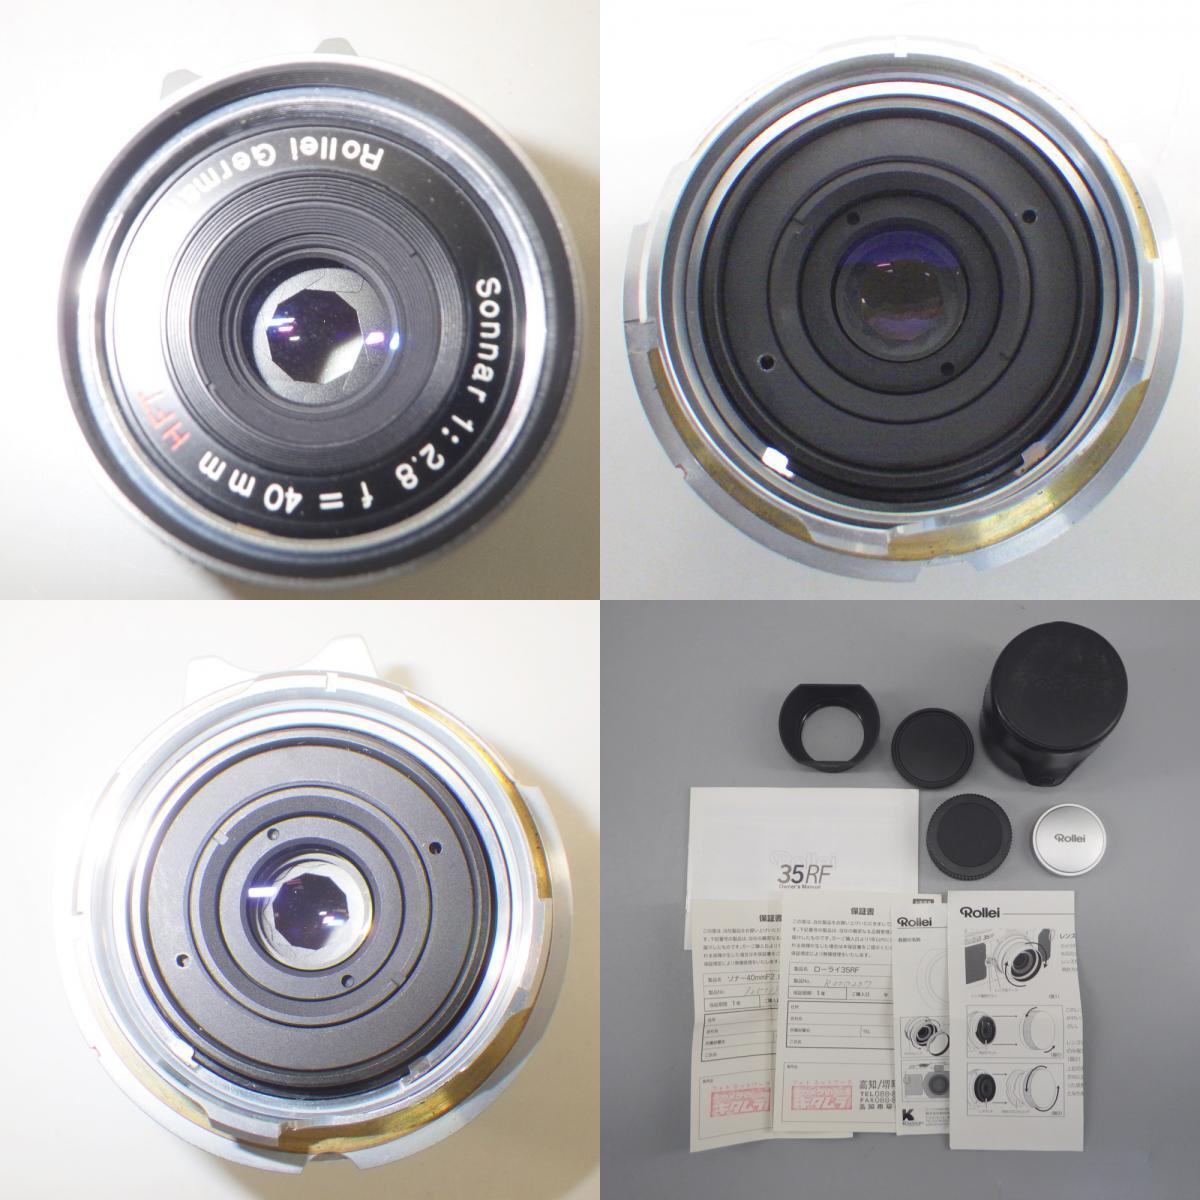 1 jpy ~ Rollei Rollei 35 RF*Sonnar 1:2.8 f=40mm HFT compact camera film camera * operation not yet verification present condition goods camera 338-2670026[O commodity ]